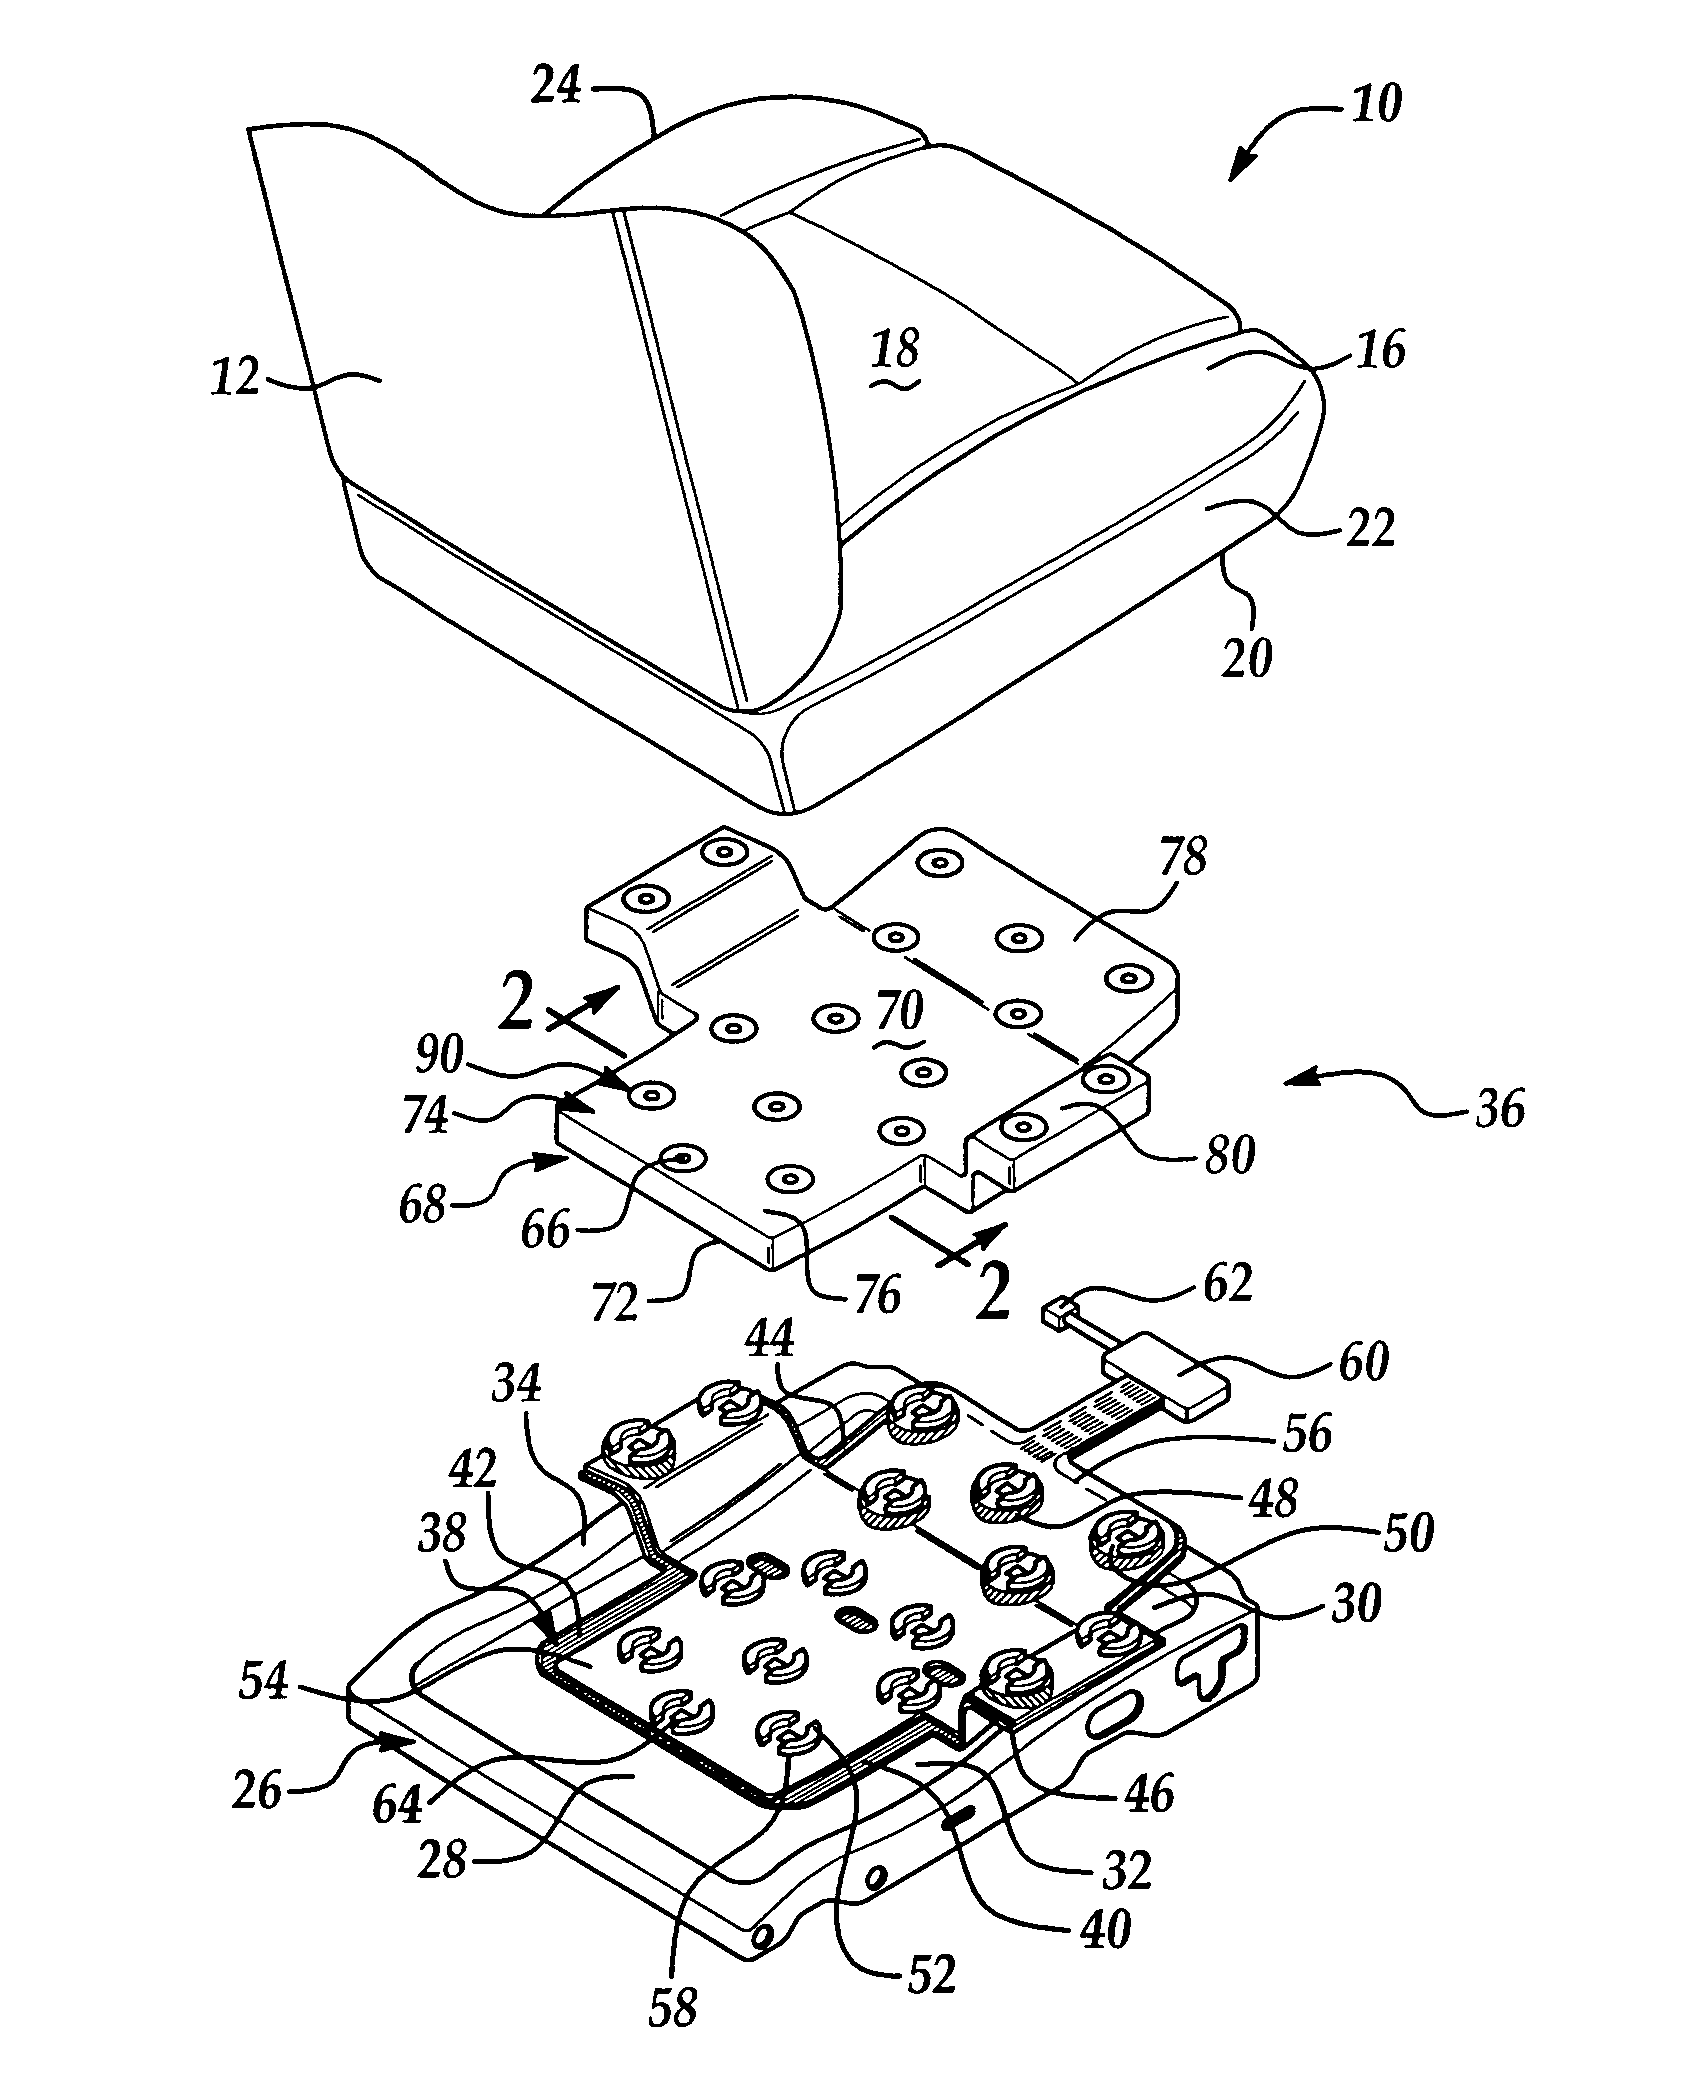 Vehicle seat assembly having a vehicle occupant sensing system with a biasing pad